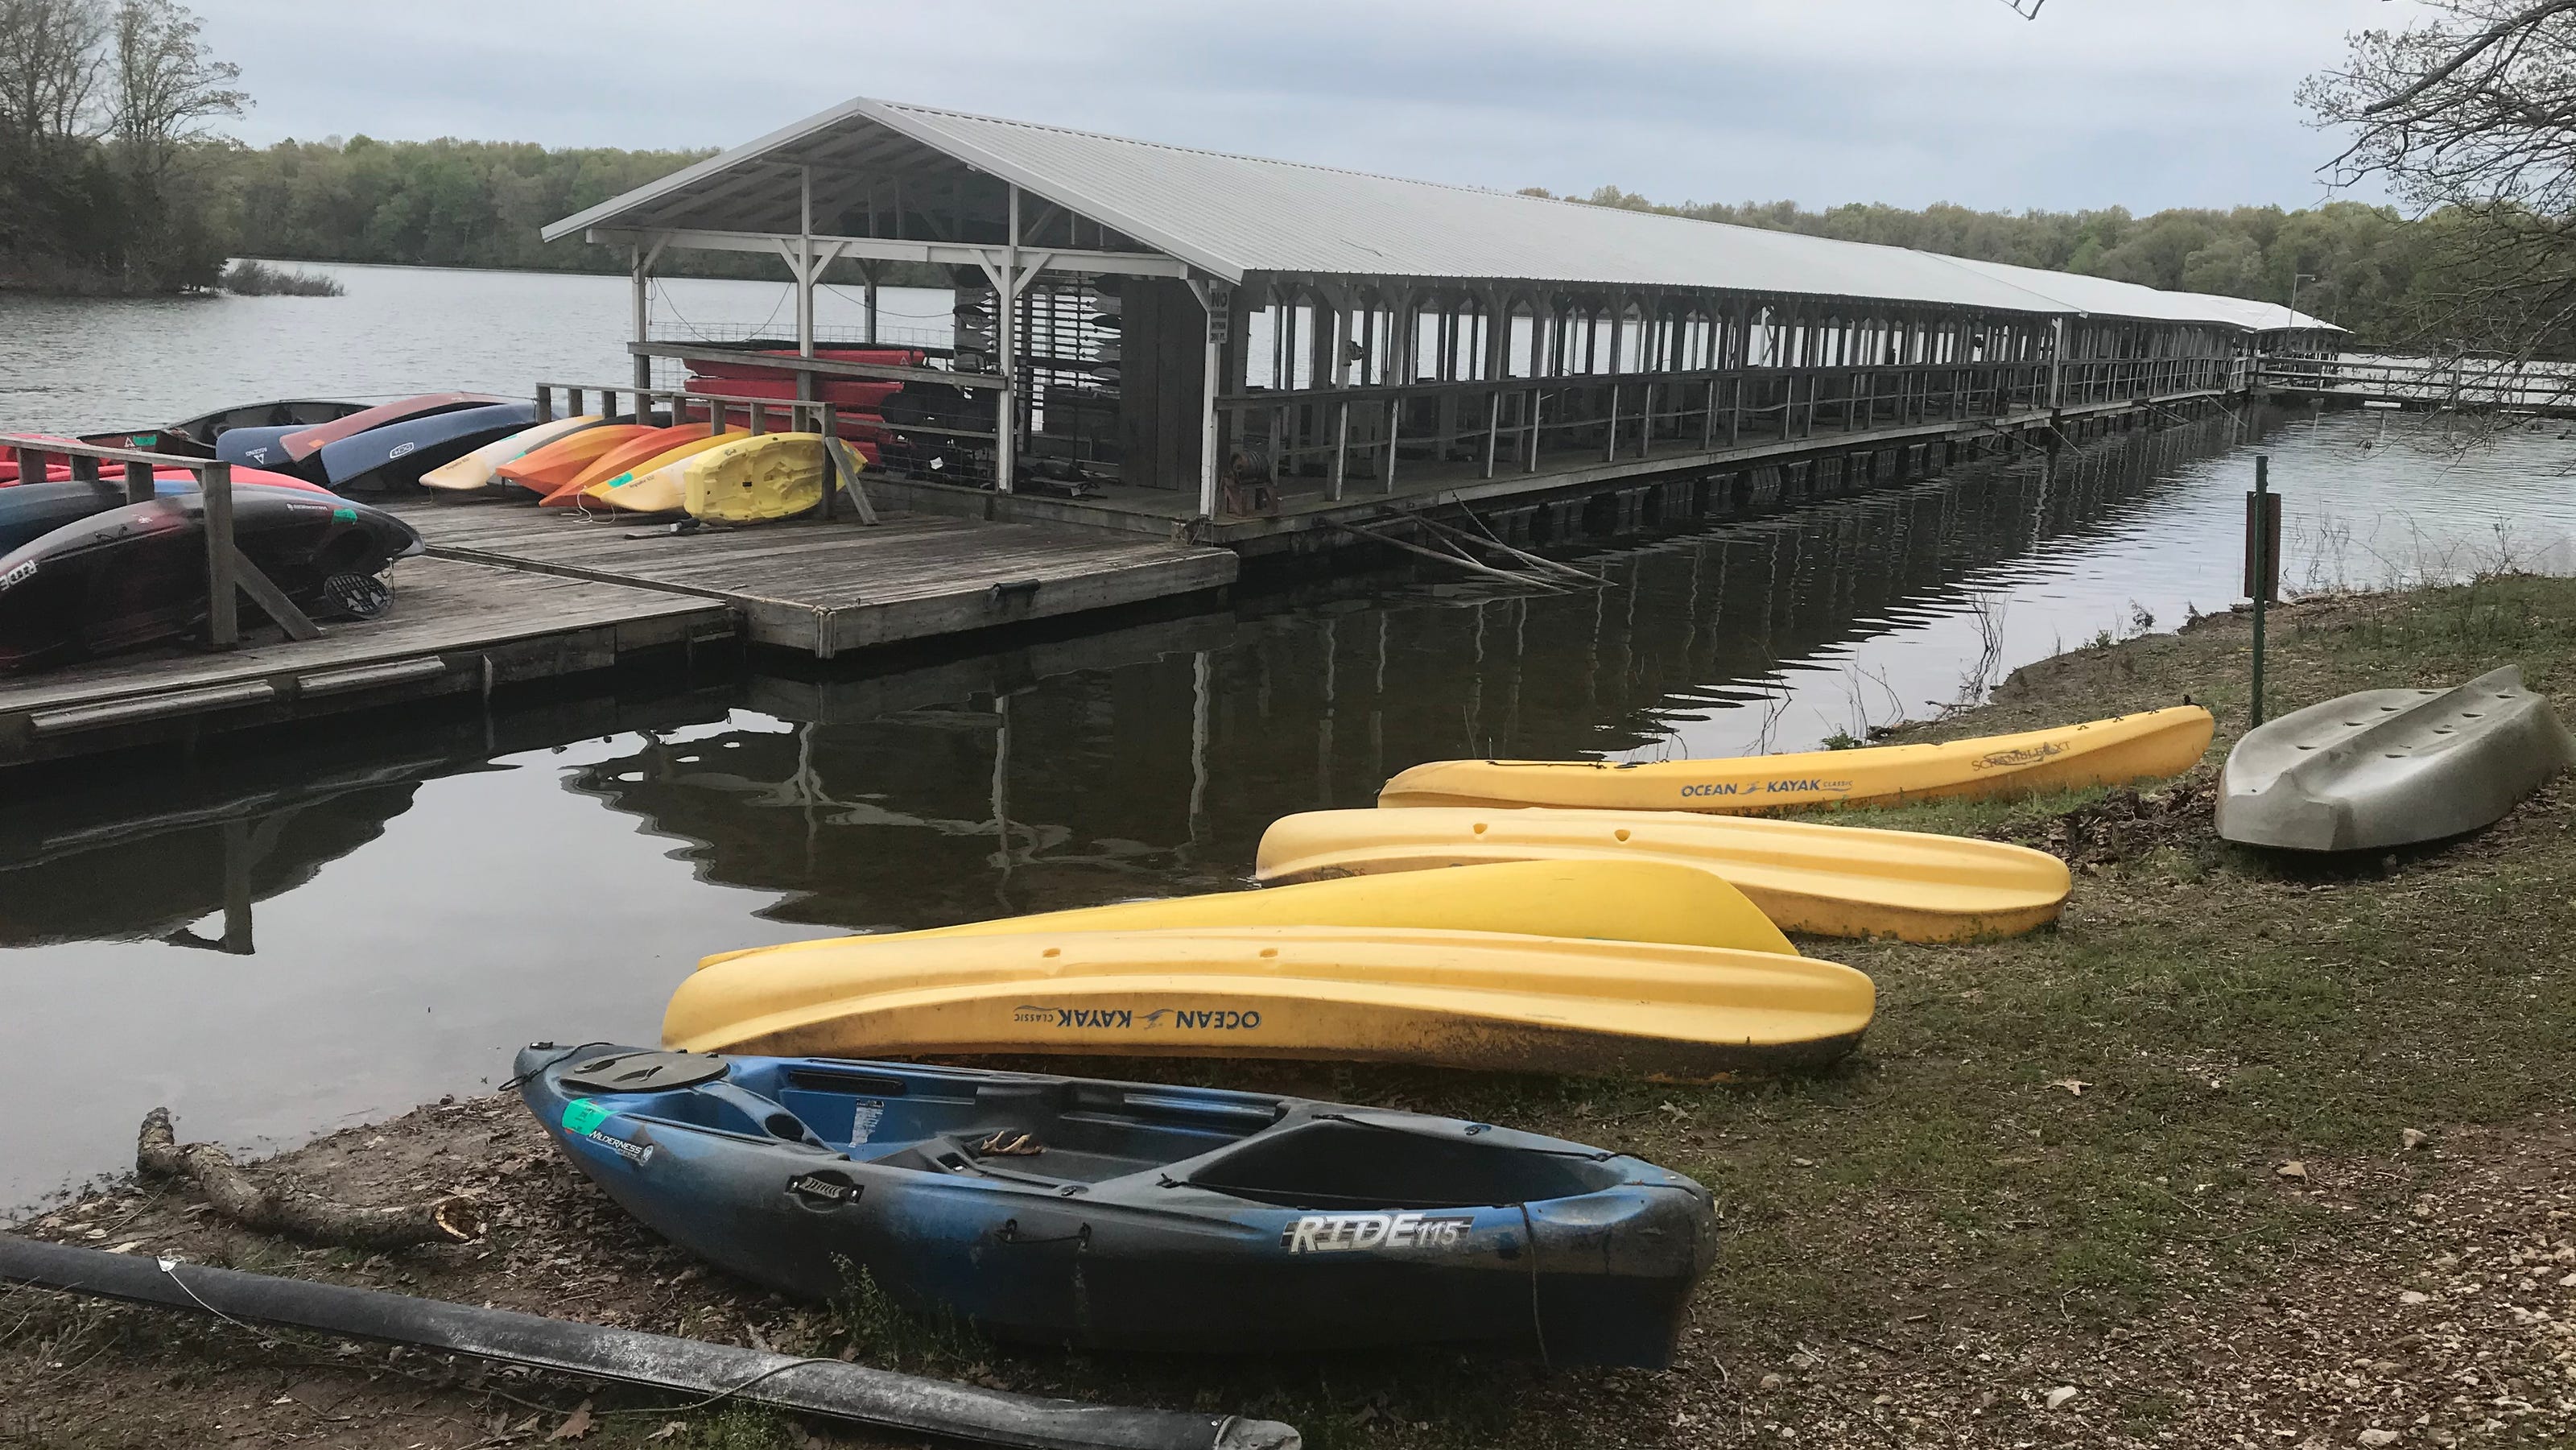 Watershed Committee of the Ozarks gets lease for Fellows Lake marina - News-Leader